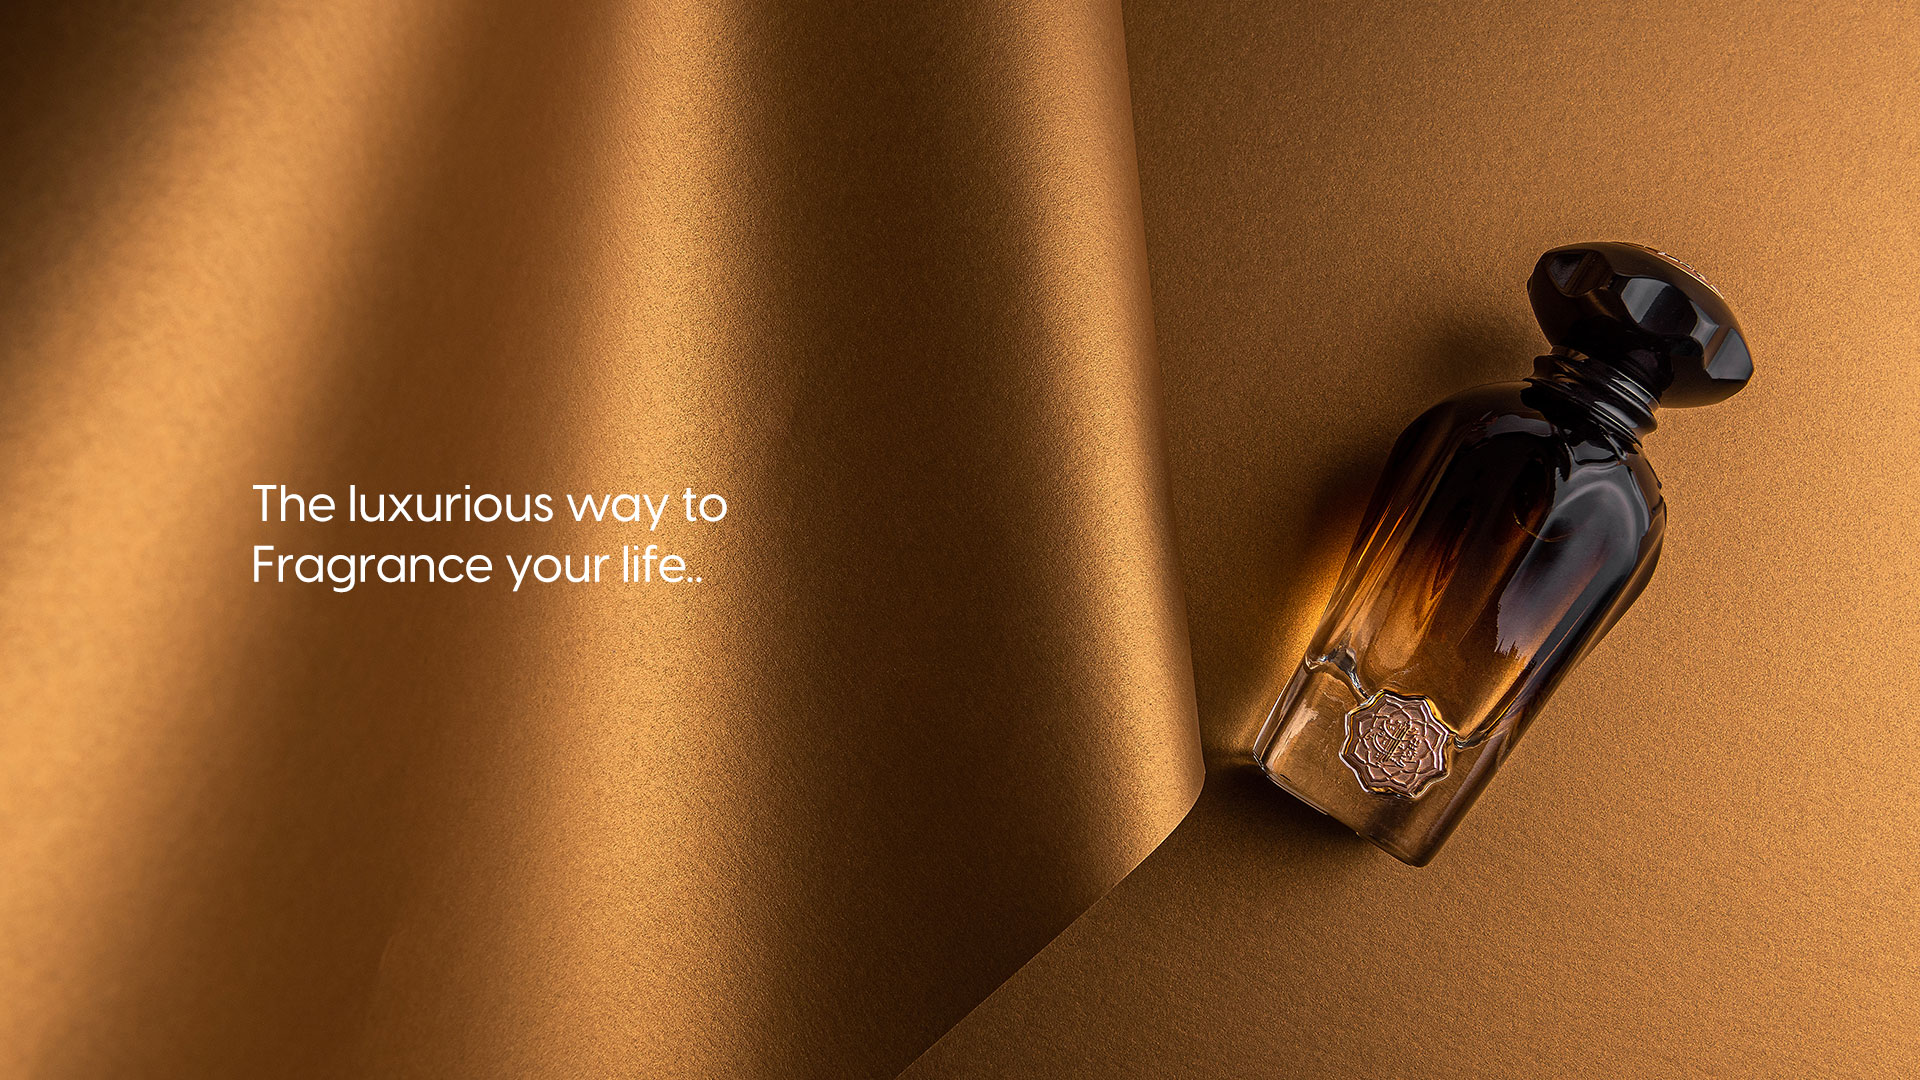 The Luxurious Way to Fragrance Your Life